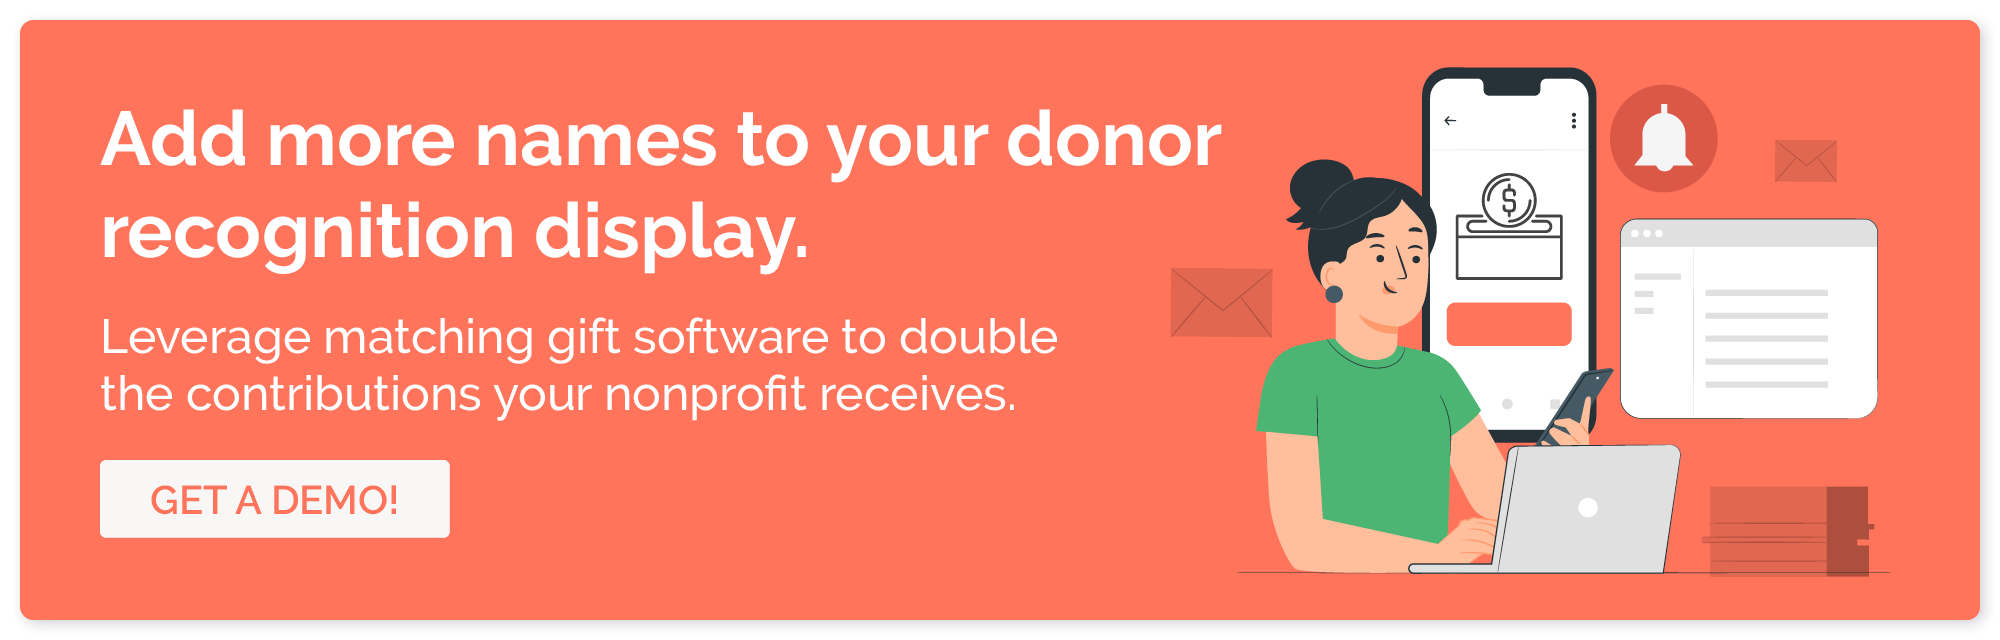 Get a demo of our matching gift software, so you can drive donations and add more names to your donor recognition wall.